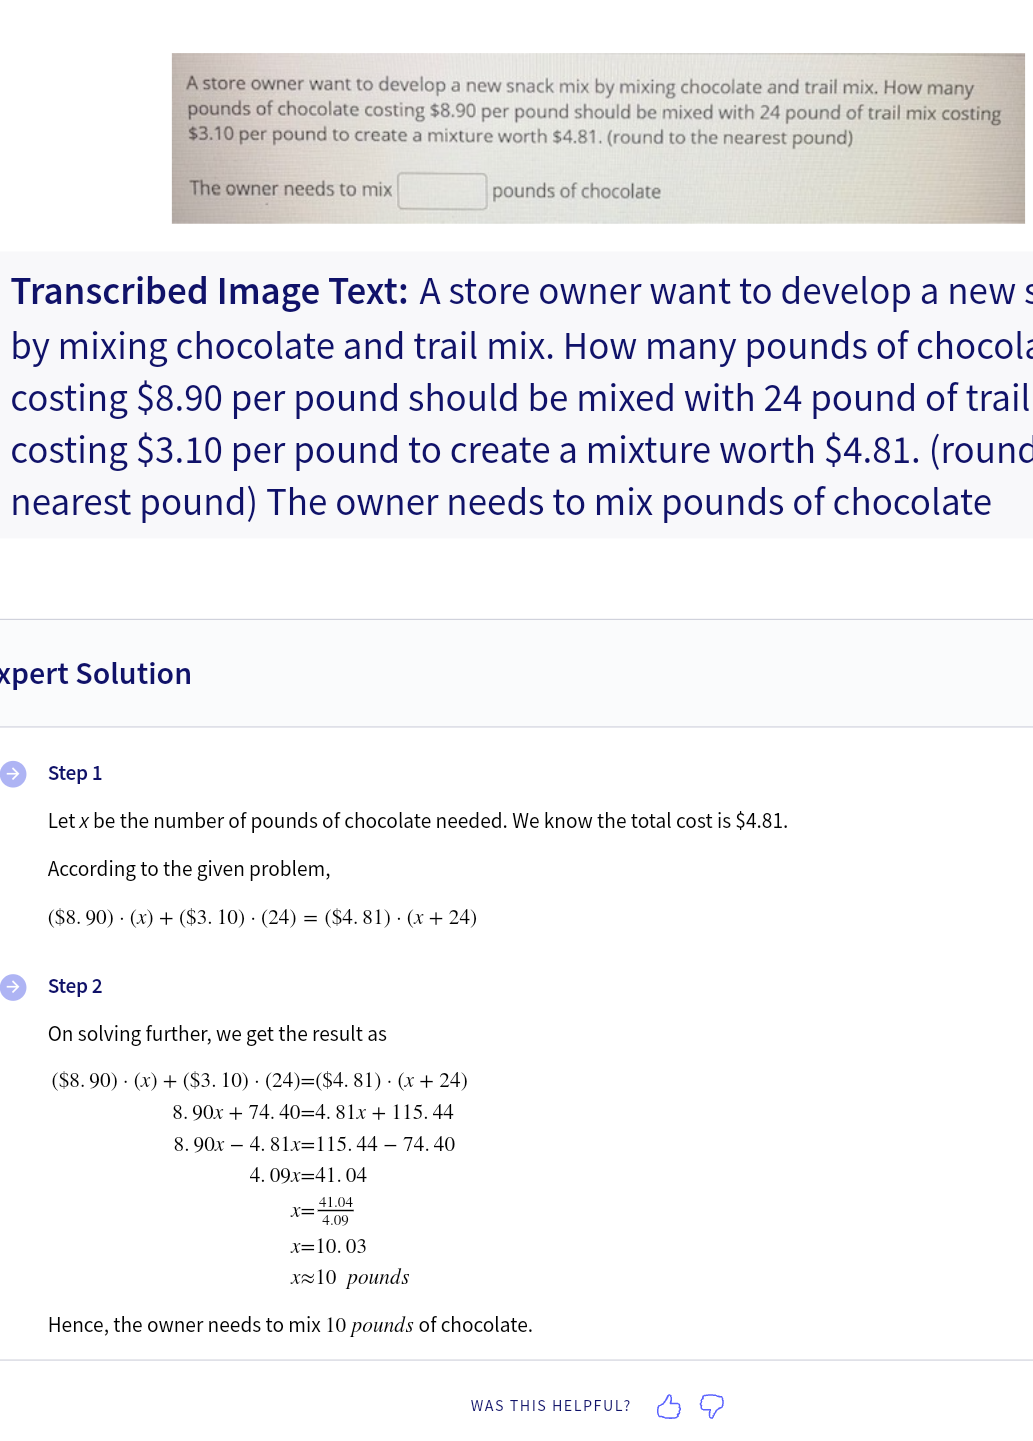 A store owner want to develop a new snack mix by mixing chocolate and trail mix. How many
pounds of chocolate costing $8.90 per pound should be mixed with 24 pound of trail mix costing
$3.10 per pound to create a mixture worth $4.81. (round to the nearest pound)
pounds of chocolate
The owner needs to mix
Transcribed Image Text: A store owner want to develop a new s
by mixing chocolate and trail mix. How many pounds of chocola
costing $8.90 per pound should be mixed with 24 pound of trail
costing $3.10 per pound to create a mixture worth $4.81. (round
nearest pound) The owner needs to mix pounds of chocolate
Expert Solution
Step 1
Let x be the number of pounds of chocolate needed. We know the total cost is $4.81.
According to the given problem,
($8.90) (x) + ($3. 10) (24) = ($4.81). (x + 24)
Step 2
On solving further, we get the result as
($8.90) (x) + ($3. 10) (24)=($4.81). (x+24)
8.90x + 74.40=4.81x + 115.44
8.90x4.81x=115.44 - 74.40
4.09x=41.04
41.04
4.09
x=10.03
x≈10 pounds
Hence, the owner needs to mix 10 pounds of chocolate.
X=
WAS THIS HELPFUL?